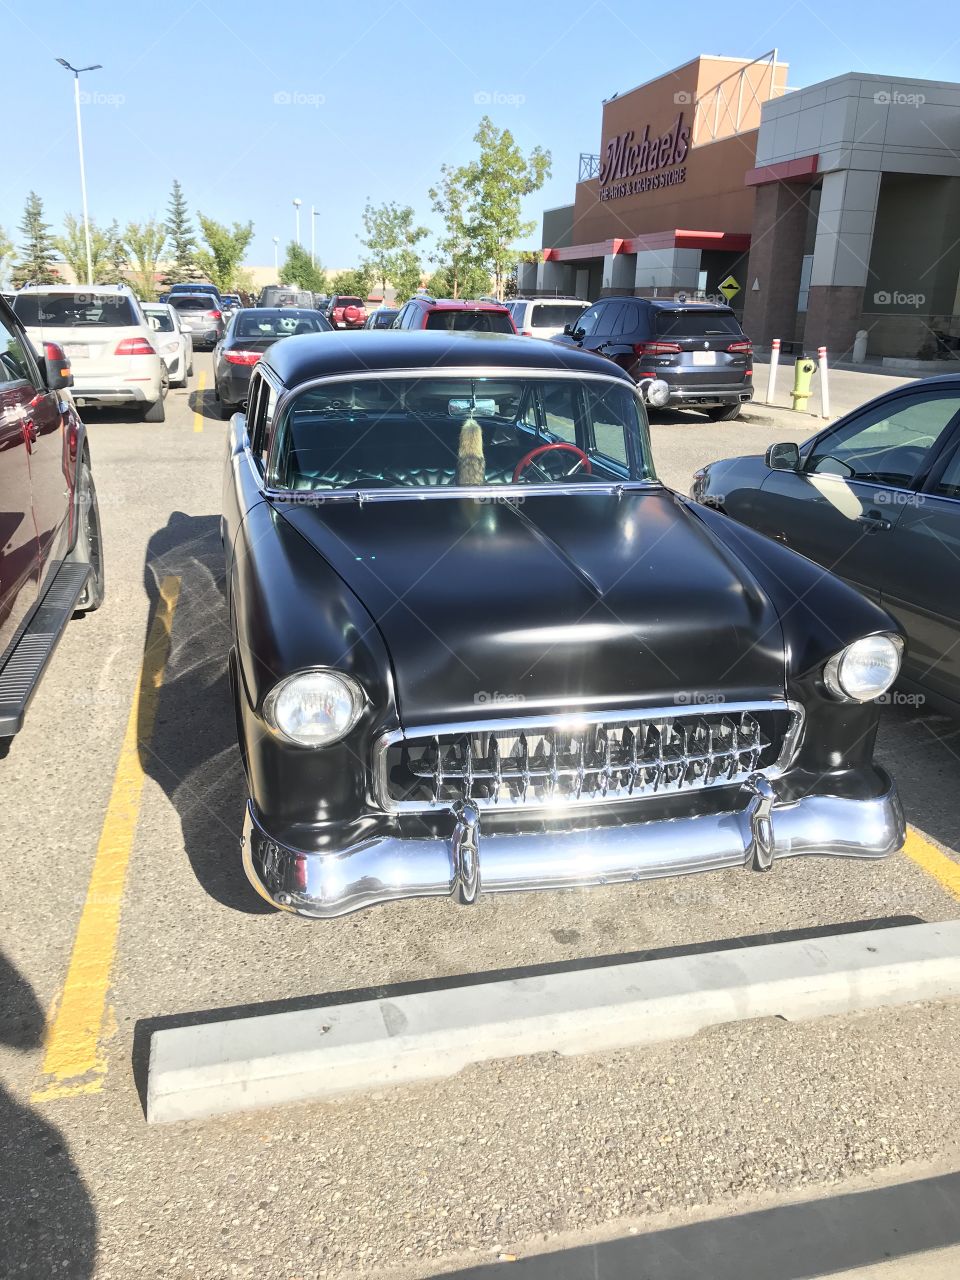 Vintage car spotted in the parking lot. They don’t make them like this anymore!